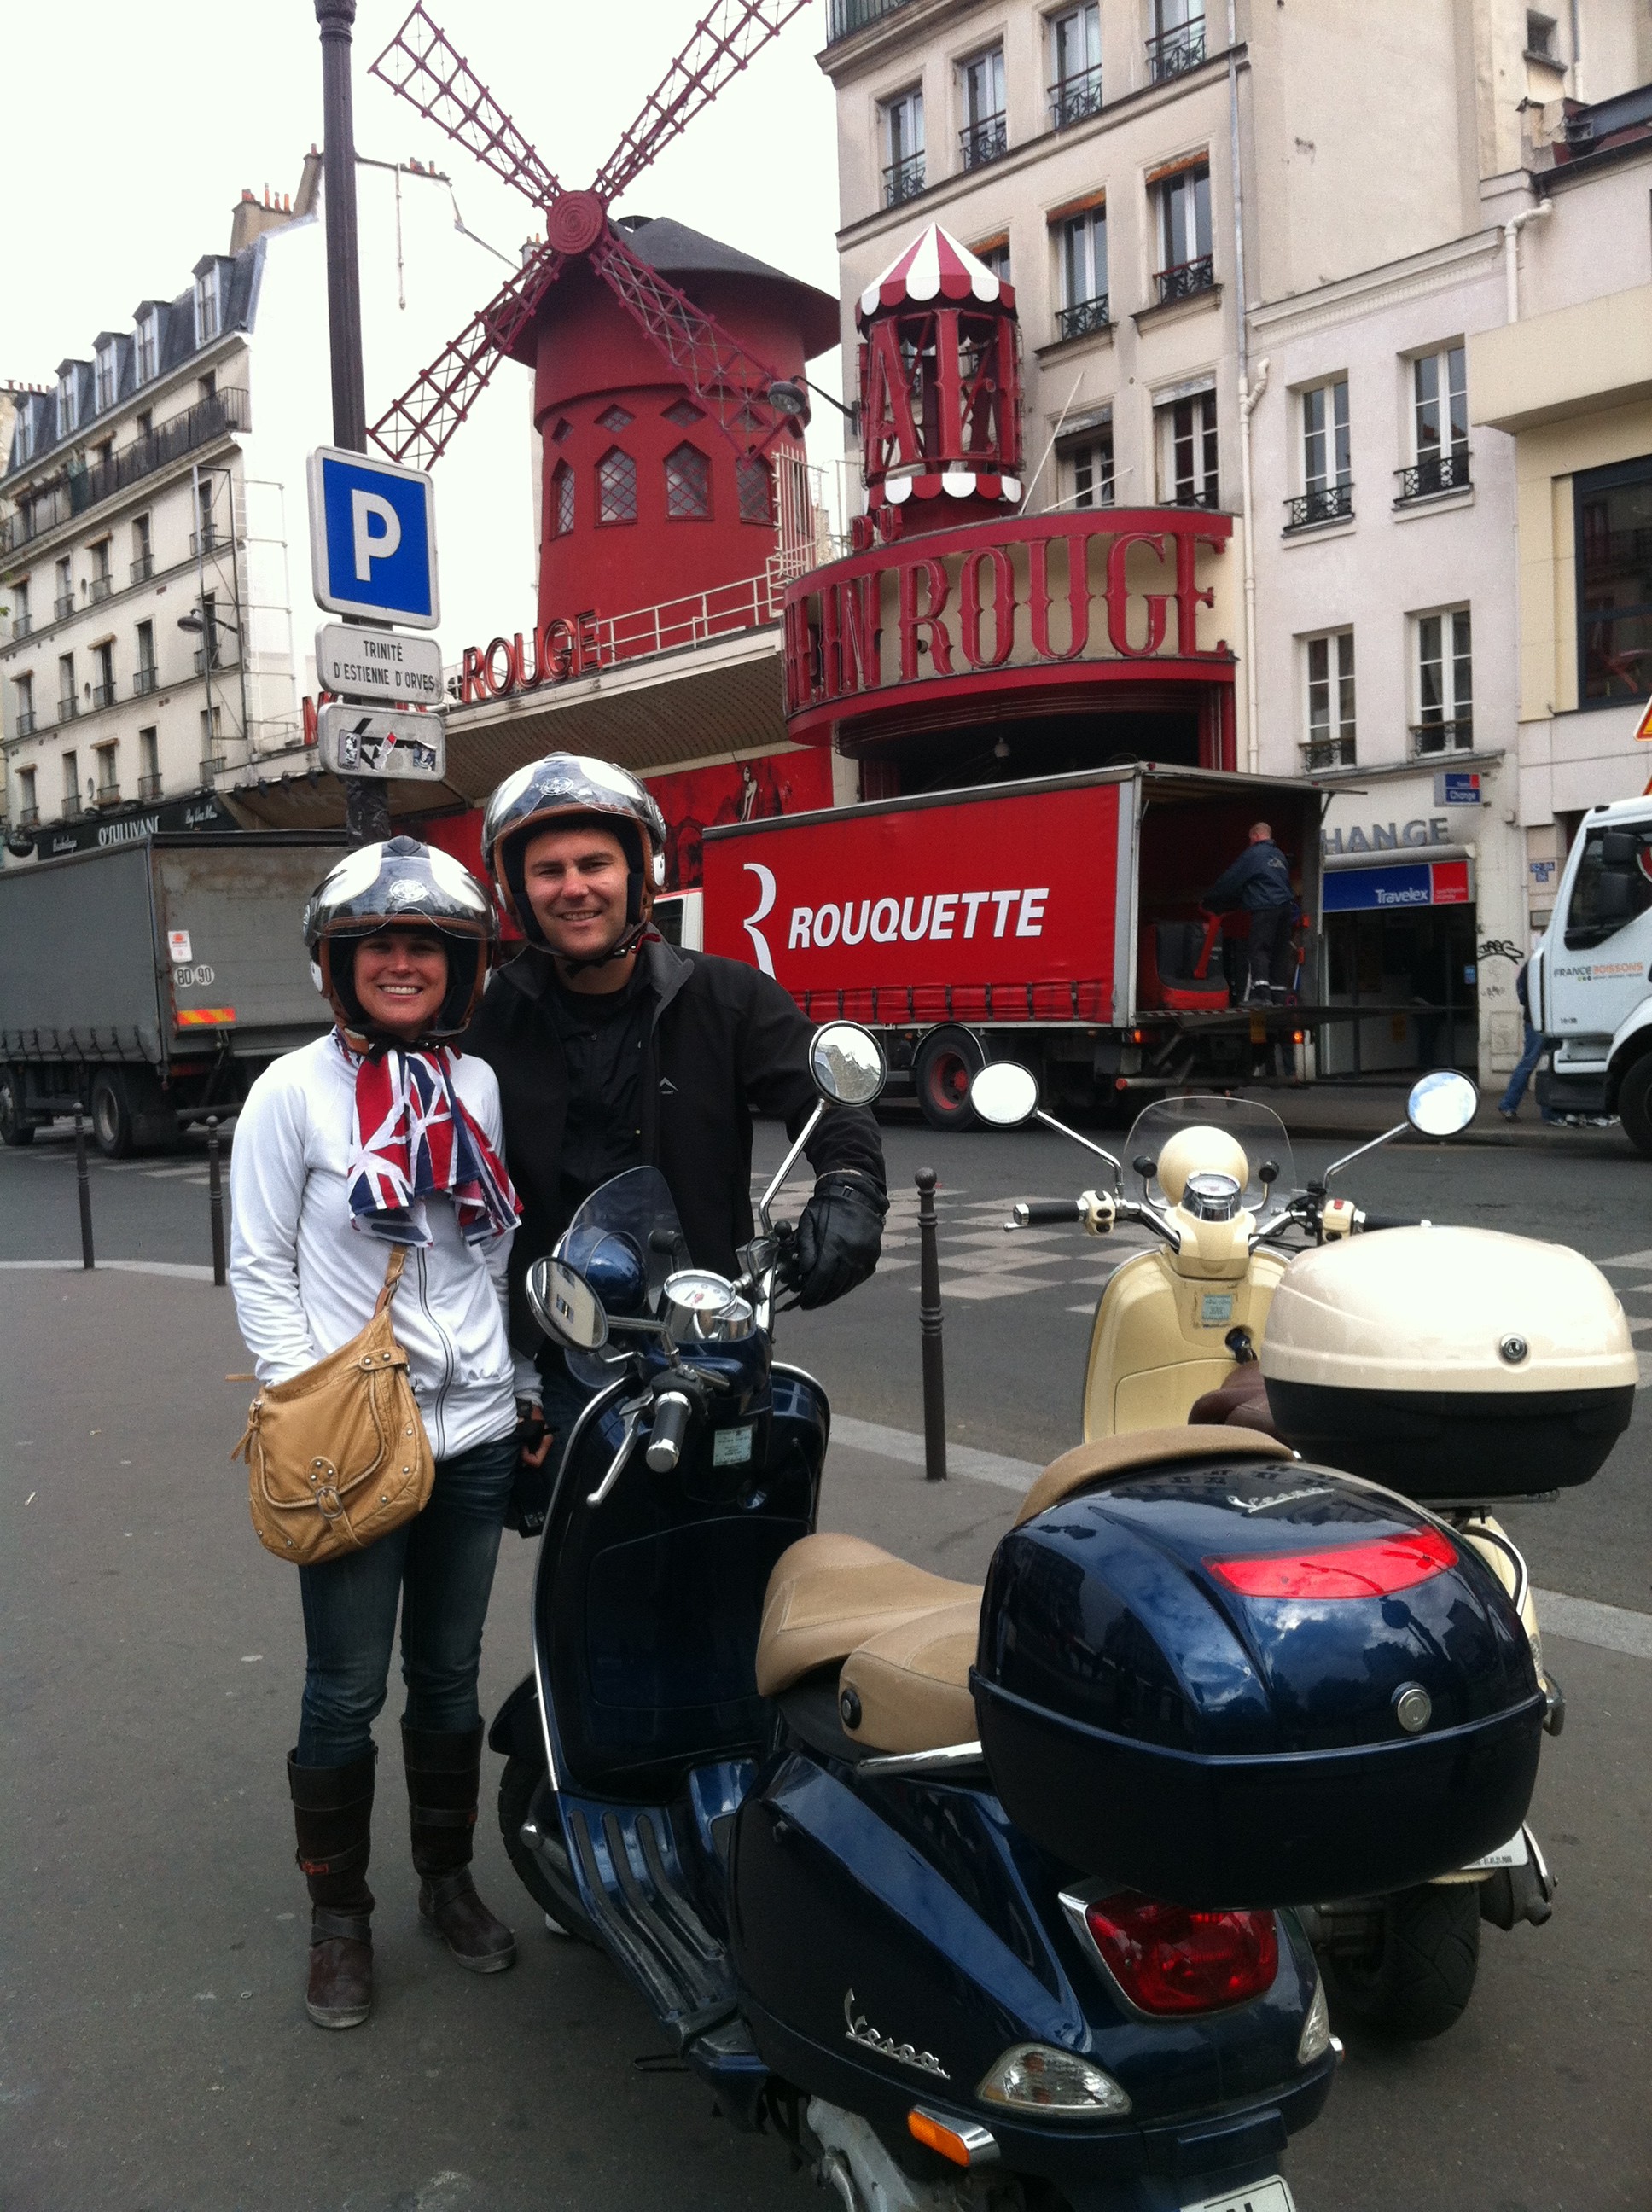 Moulin Rouge Paris by vespa scooter with Andre and his wife during a paris sightseeing tour.